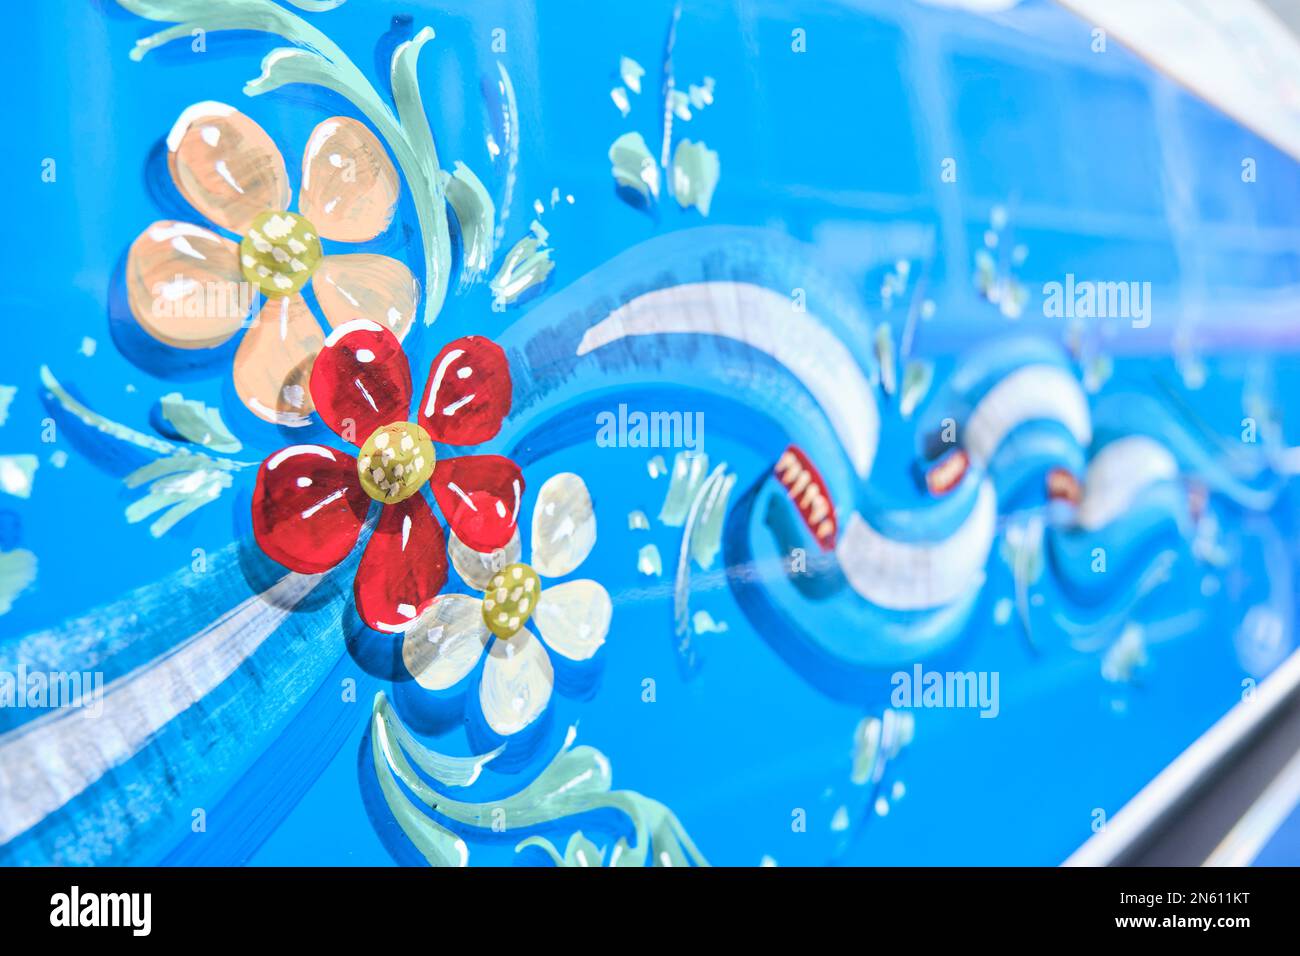 Buenos Aires, Argentina, June 20, 2022: Detail of a restored classic Mercedes Benz bus painted with ornaments, flag ribbons and flowers, in the filete Stock Photo